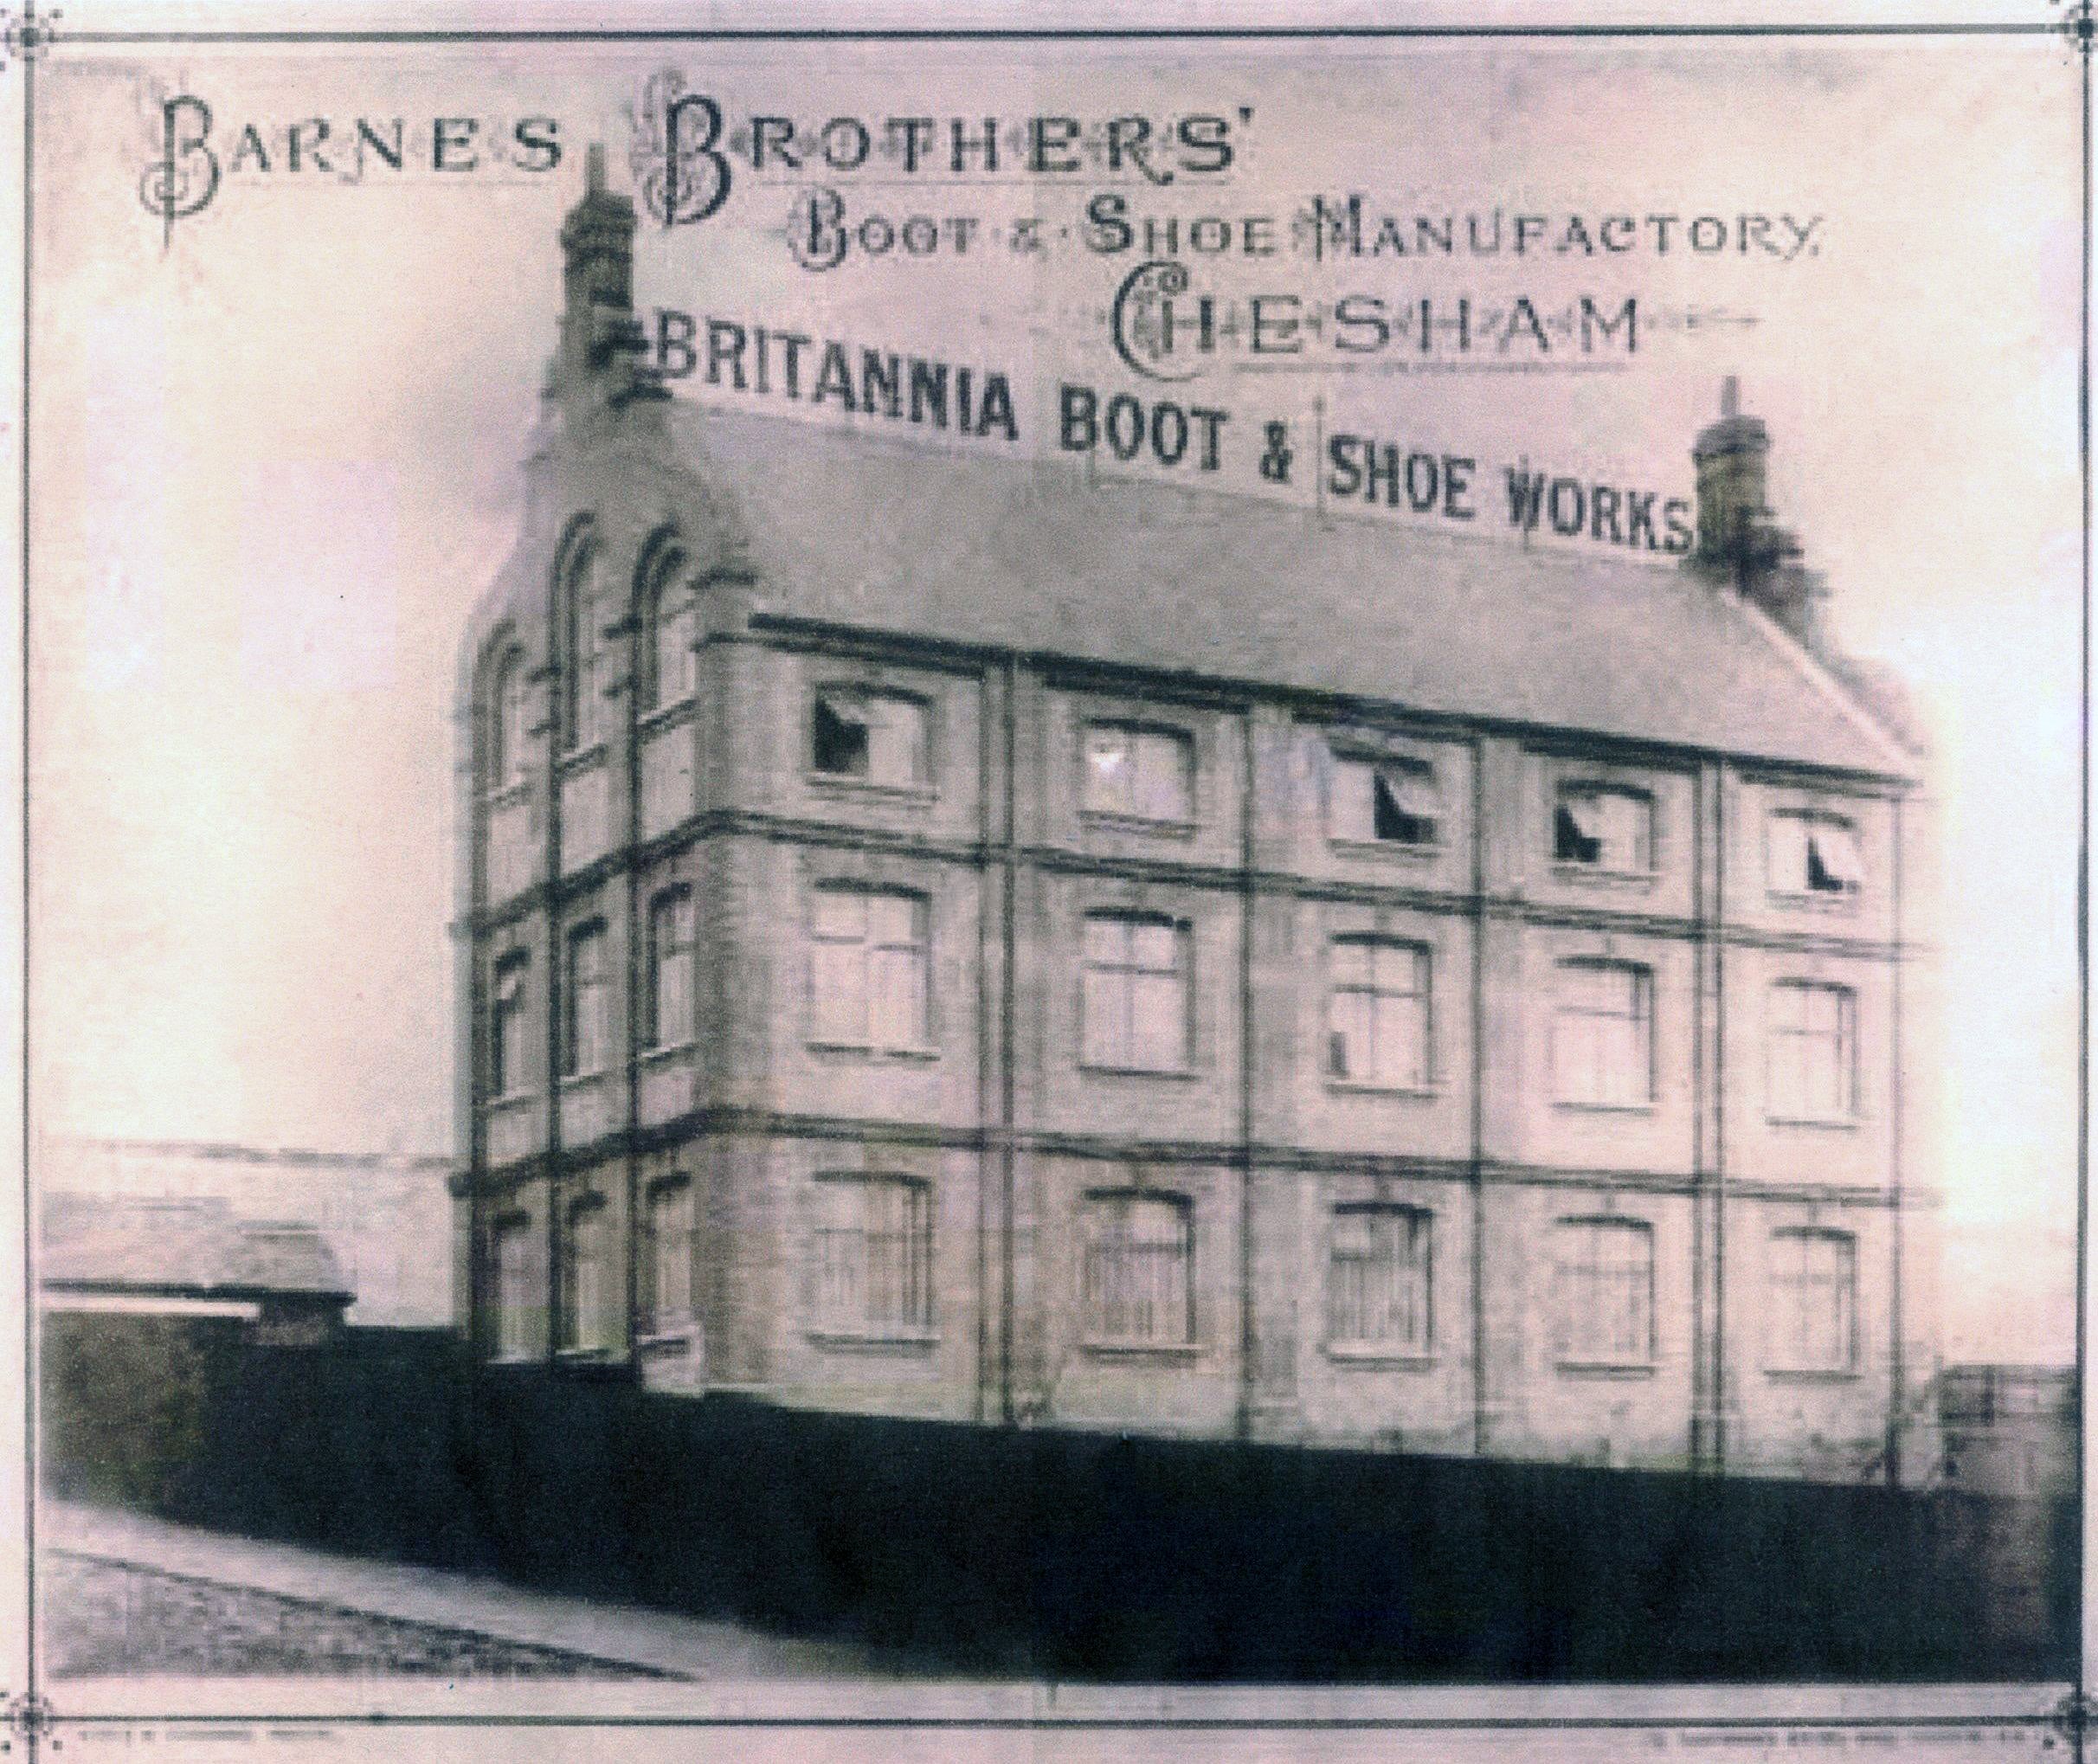 Photo of Barnes Brothers factory. Image is in black and white with Britannia Boot and Shoe Works displayed between 2 chimneys